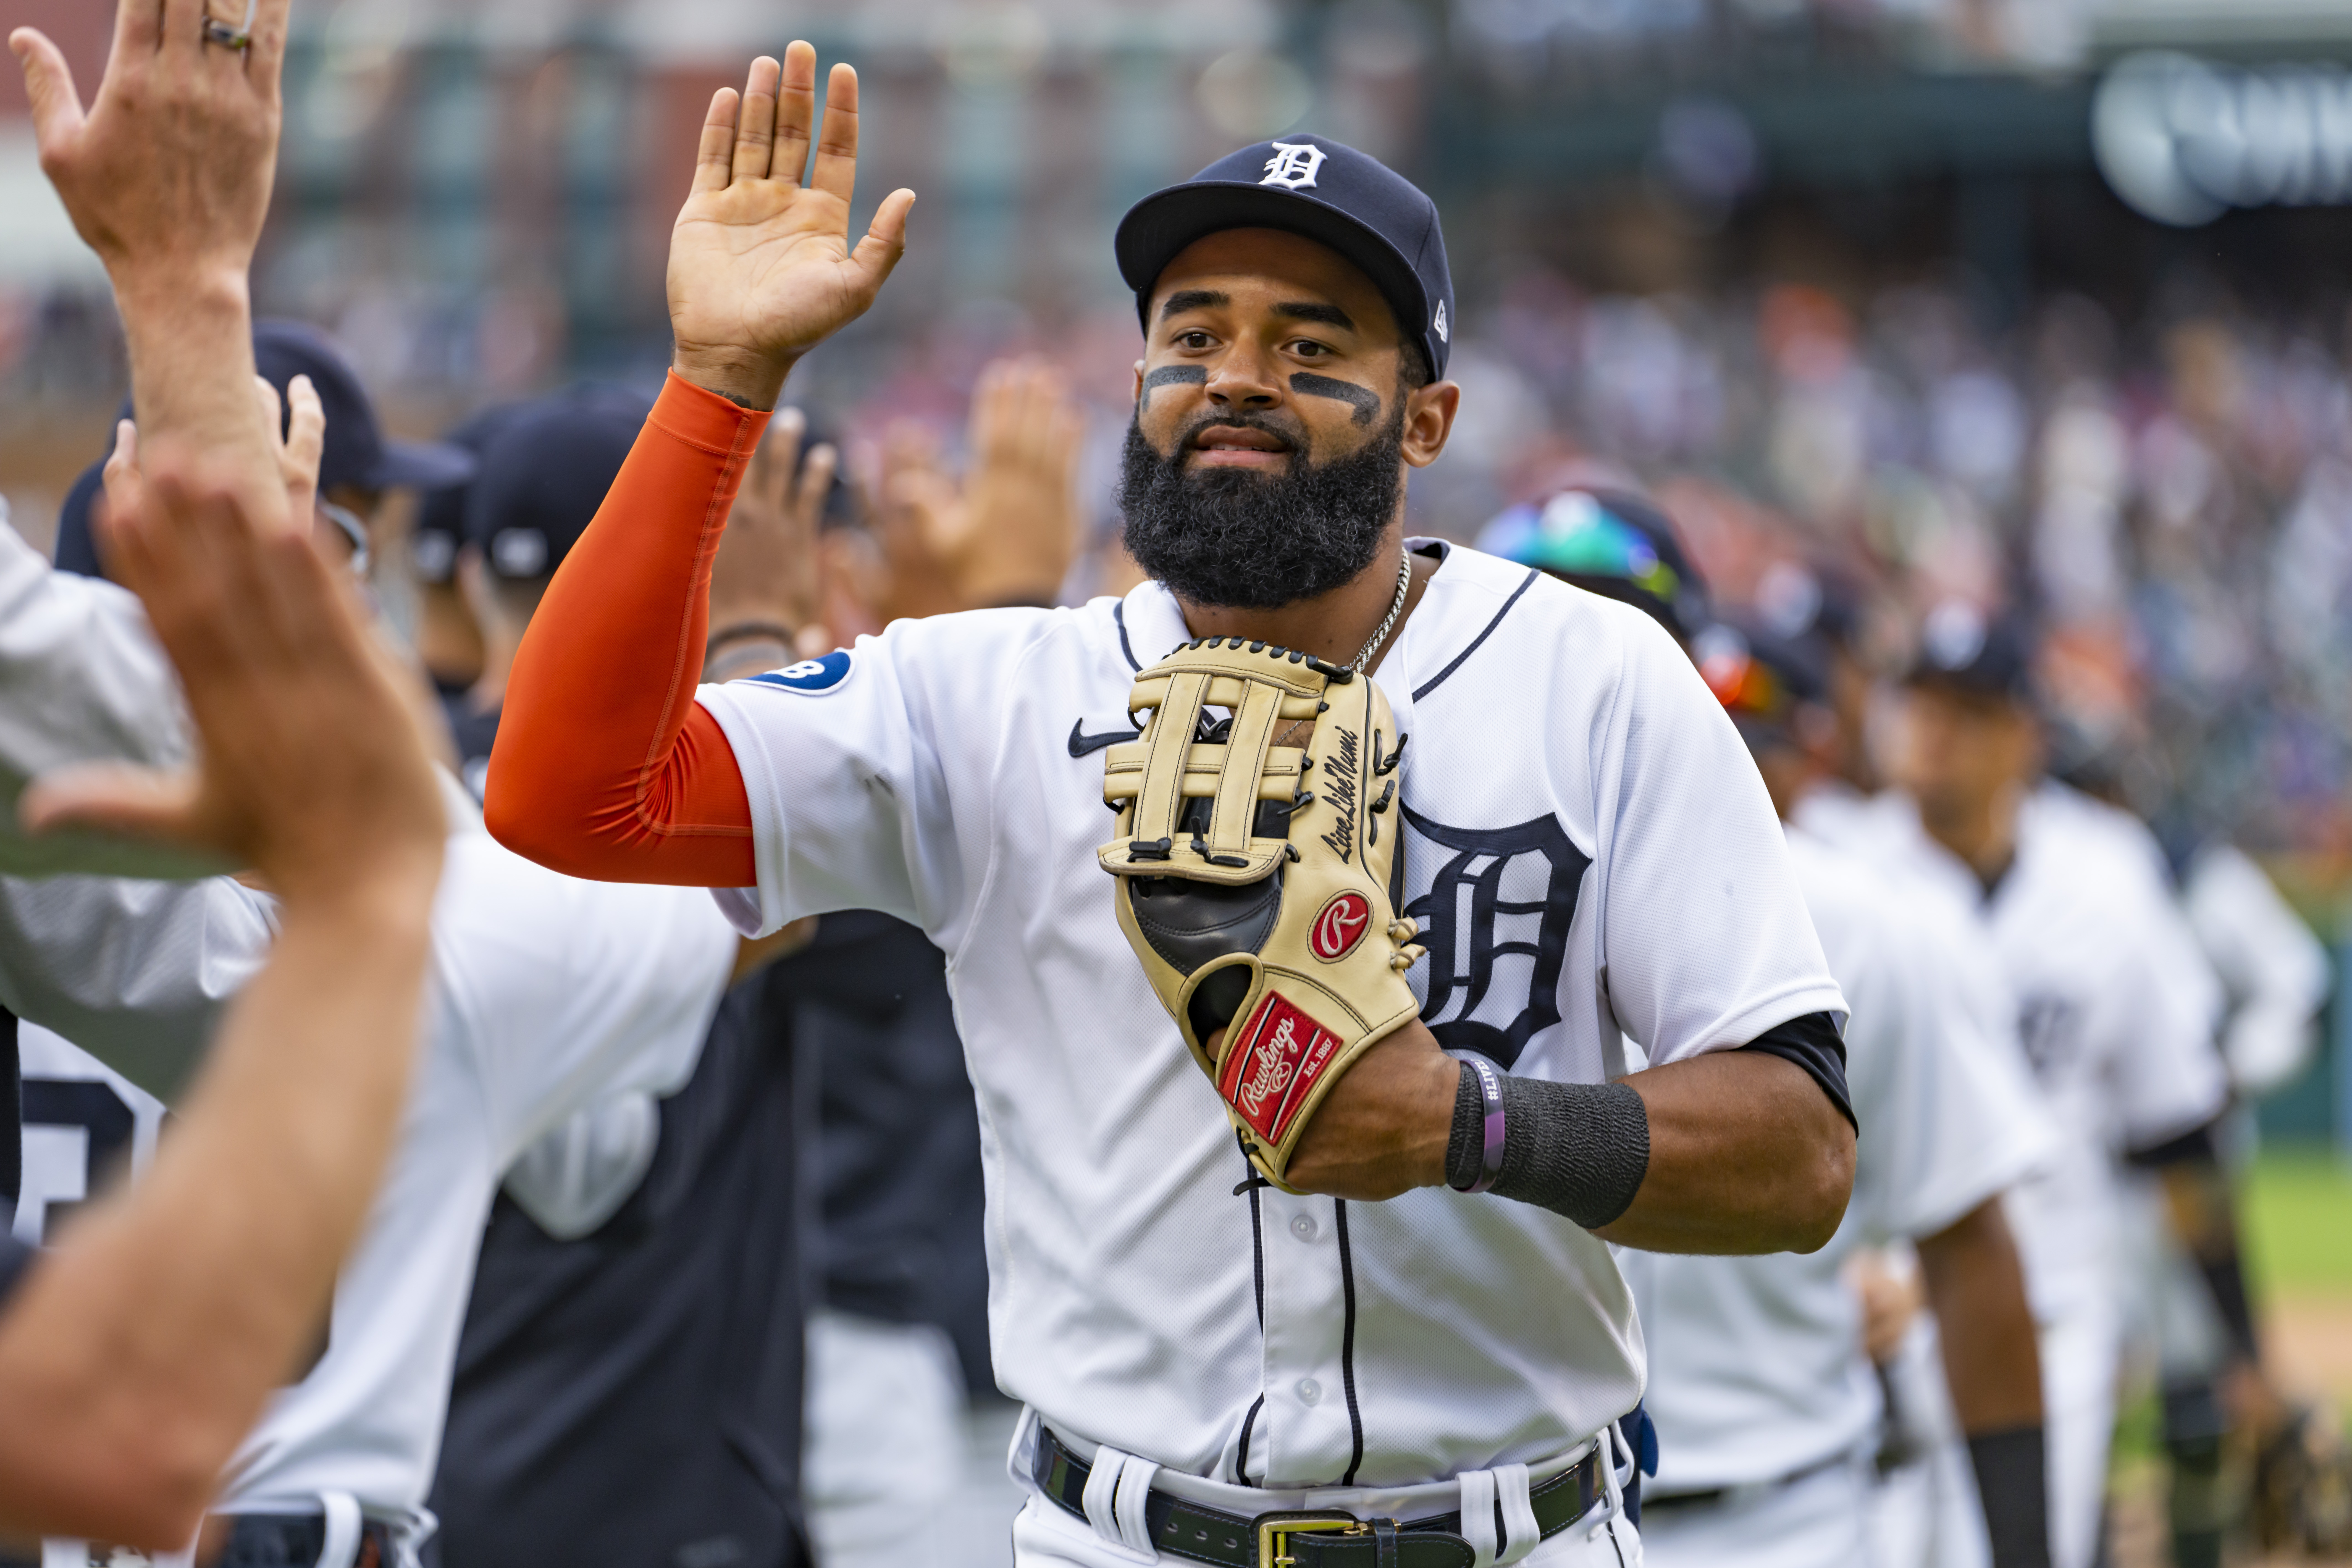 Derek Hill is going to fight for a role with the Detroit Tigers in 2022